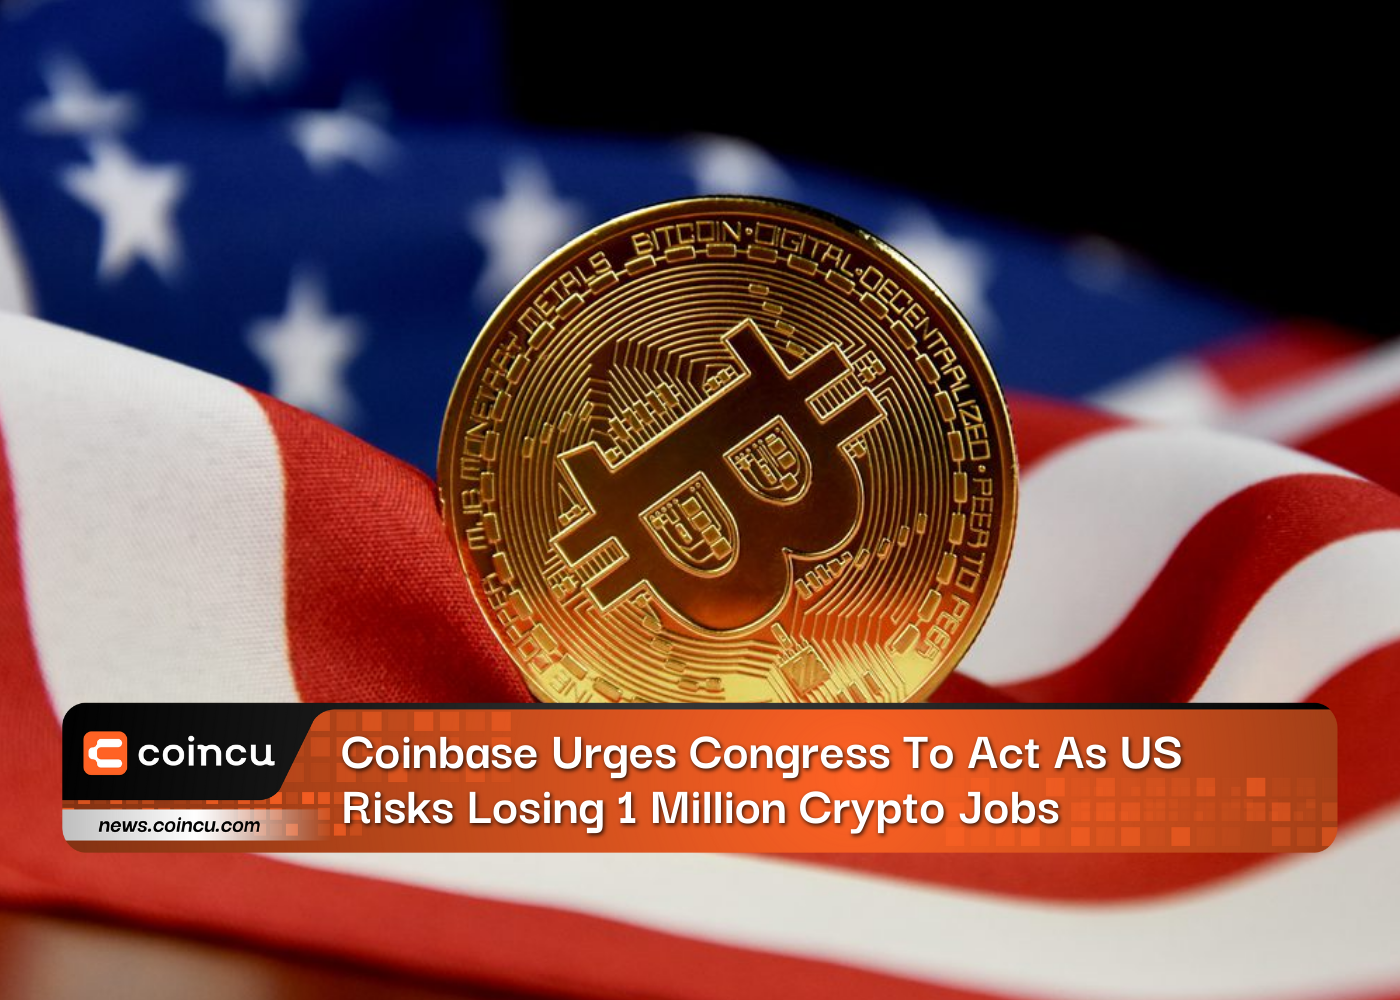 Coinbase Urges Congress To Act As US Risks Losing 1 Million Crypto Jobs